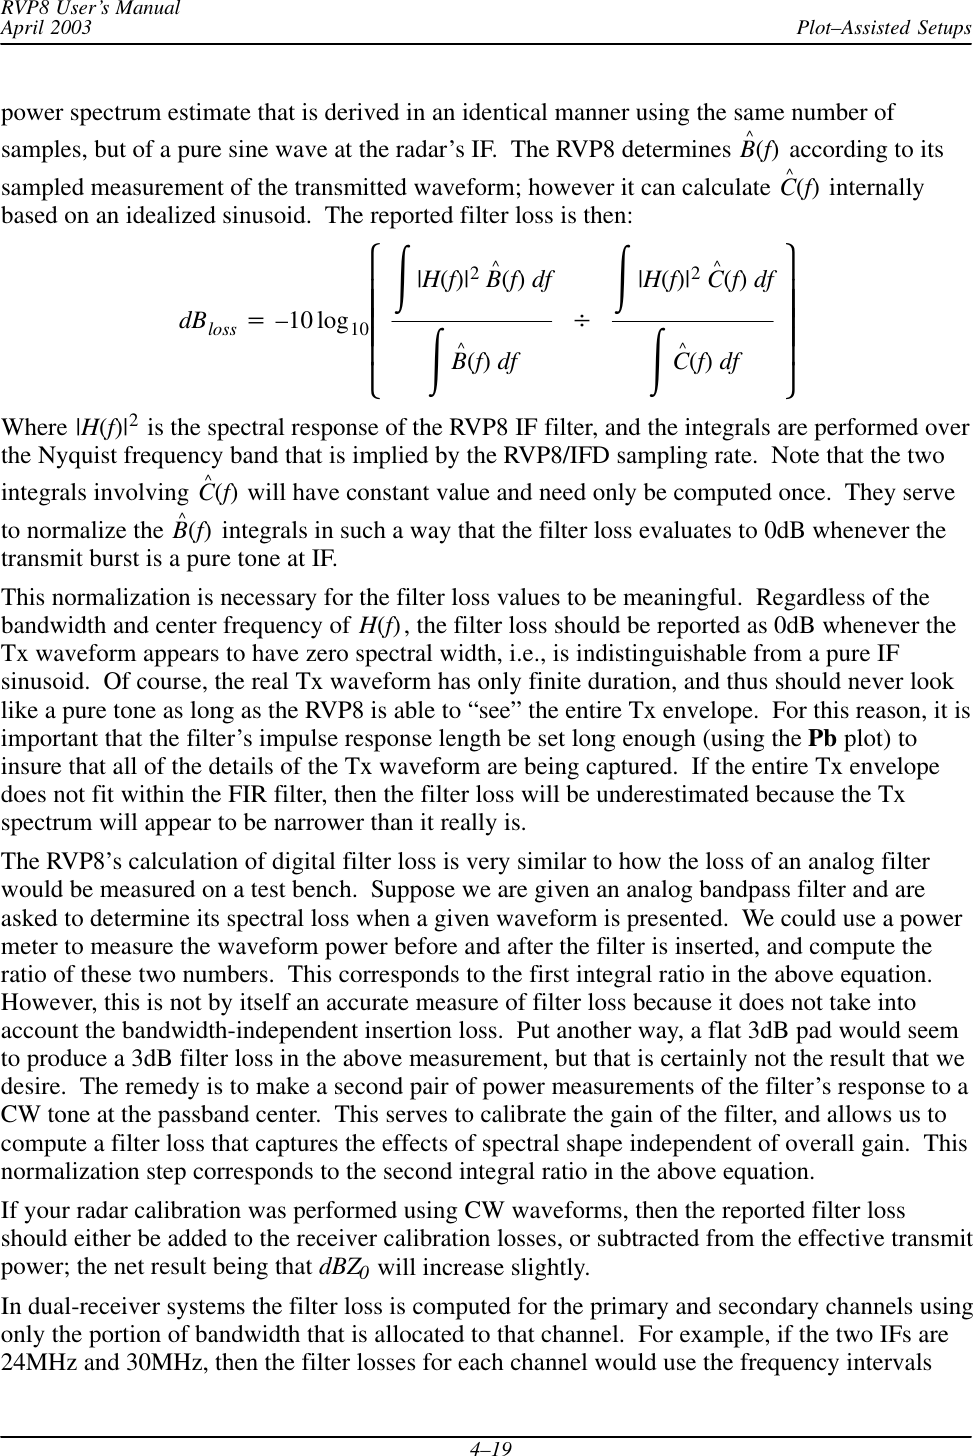 Plot–Assisted SetupsRVP8 User’s ManualApril 20034–19power spectrum estimate that is derived in an identical manner using the same number ofsamples, but of a pure sine wave at the radar’s IF.  The RVP8 determines B^(f) according to itssampled measurement of the transmitted waveform; however it can calculate C^(f) internallybased on an idealized sinusoid.  The reported filter loss is then:dBloss +–10 log10ȧȧȧȧȡȢŕ|H(f)|2B^(f)dfŕB^(f)dfBŕ|H(f)|2C^(f)dfŕC^(f)dfȧȧȧȧȣȤWhere |H(f)|2 is the spectral response of the RVP8 IF filter, and the integrals are performed overthe Nyquist frequency band that is implied by the RVP8/IFD sampling rate.  Note that the twointegrals involving C^(f) will have constant value and need only be computed once.  They serveto normalize the B^(f) integrals in such a way that the filter loss evaluates to 0dB whenever thetransmit burst is a pure tone at IF.This normalization is necessary for the filter loss values to be meaningful.  Regardless of thebandwidth and center frequency of H(f), the filter loss should be reported as 0dB whenever theTx waveform appears to have zero spectral width, i.e., is indistinguishable from a pure IFsinusoid.  Of course, the real Tx waveform has only finite duration, and thus should never looklike a pure tone as long as the RVP8 is able to “see” the entire Tx envelope.  For this reason, it isimportant that the filter’s impulse response length be set long enough (using the Pb plot) toinsure that all of the details of the Tx waveform are being captured.  If the entire Tx envelopedoes not fit within the FIR filter, then the filter loss will be underestimated because the Txspectrum will appear to be narrower than it really is.The RVP8’s calculation of digital filter loss is very similar to how the loss of an analog filterwould be measured on a test bench.  Suppose we are given an analog bandpass filter and areasked to determine its spectral loss when a given waveform is presented.  We could use a powermeter to measure the waveform power before and after the filter is inserted, and compute theratio of these two numbers.  This corresponds to the first integral ratio in the above equation.However, this is not by itself an accurate measure of filter loss because it does not take intoaccount the bandwidth-independent insertion loss.  Put another way, a flat 3dB pad would seemto produce a 3dB filter loss in the above measurement, but that is certainly not the result that wedesire.  The remedy is to make a second pair of power measurements of the filter’s response to aCW tone at the passband center.  This serves to calibrate the gain of the filter, and allows us tocompute a filter loss that captures the effects of spectral shape independent of overall gain.  Thisnormalization step corresponds to the second integral ratio in the above equation.If your radar calibration was performed using CW waveforms, then the reported filter lossshould either be added to the receiver calibration losses, or subtracted from the effective transmitpower; the net result being that dBZ0 will increase slightly.In dual-receiver systems the filter loss is computed for the primary and secondary channels usingonly the portion of bandwidth that is allocated to that channel.  For example, if the two IFs are24MHz and 30MHz, then the filter losses for each channel would use the frequency intervals